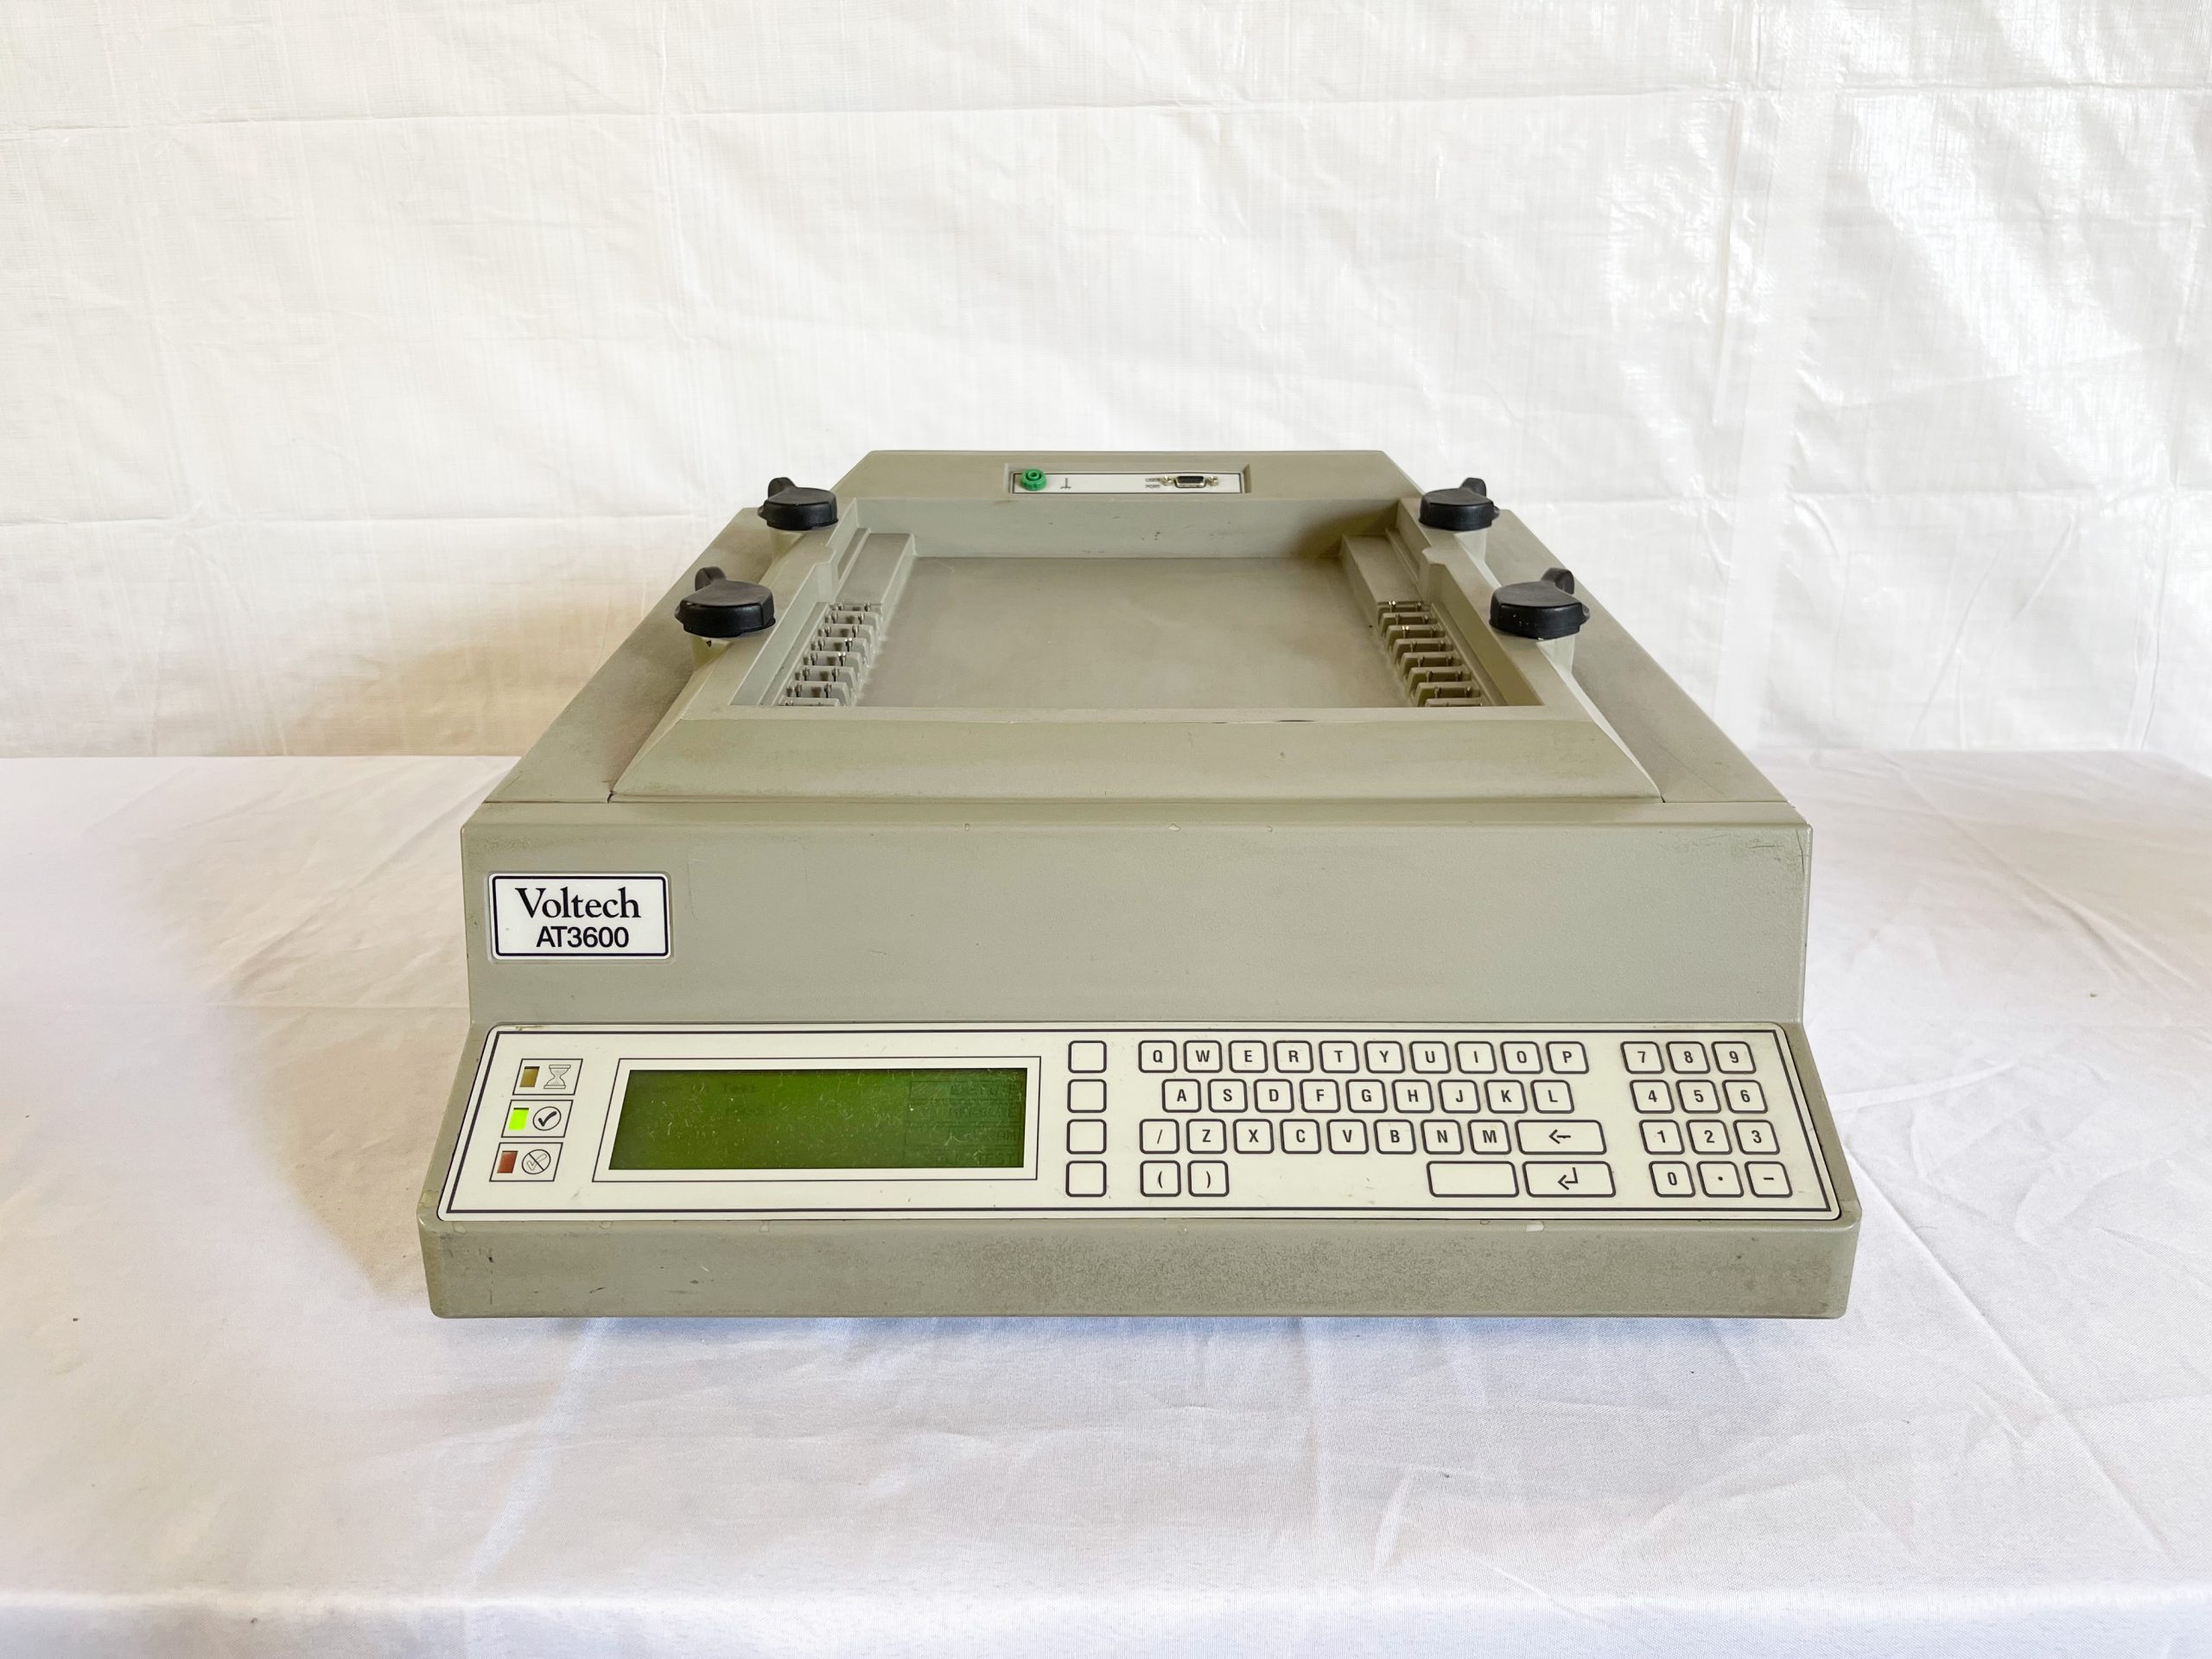 Voltech AT 3600 Automatic Transformer Tester -67076 For Sale